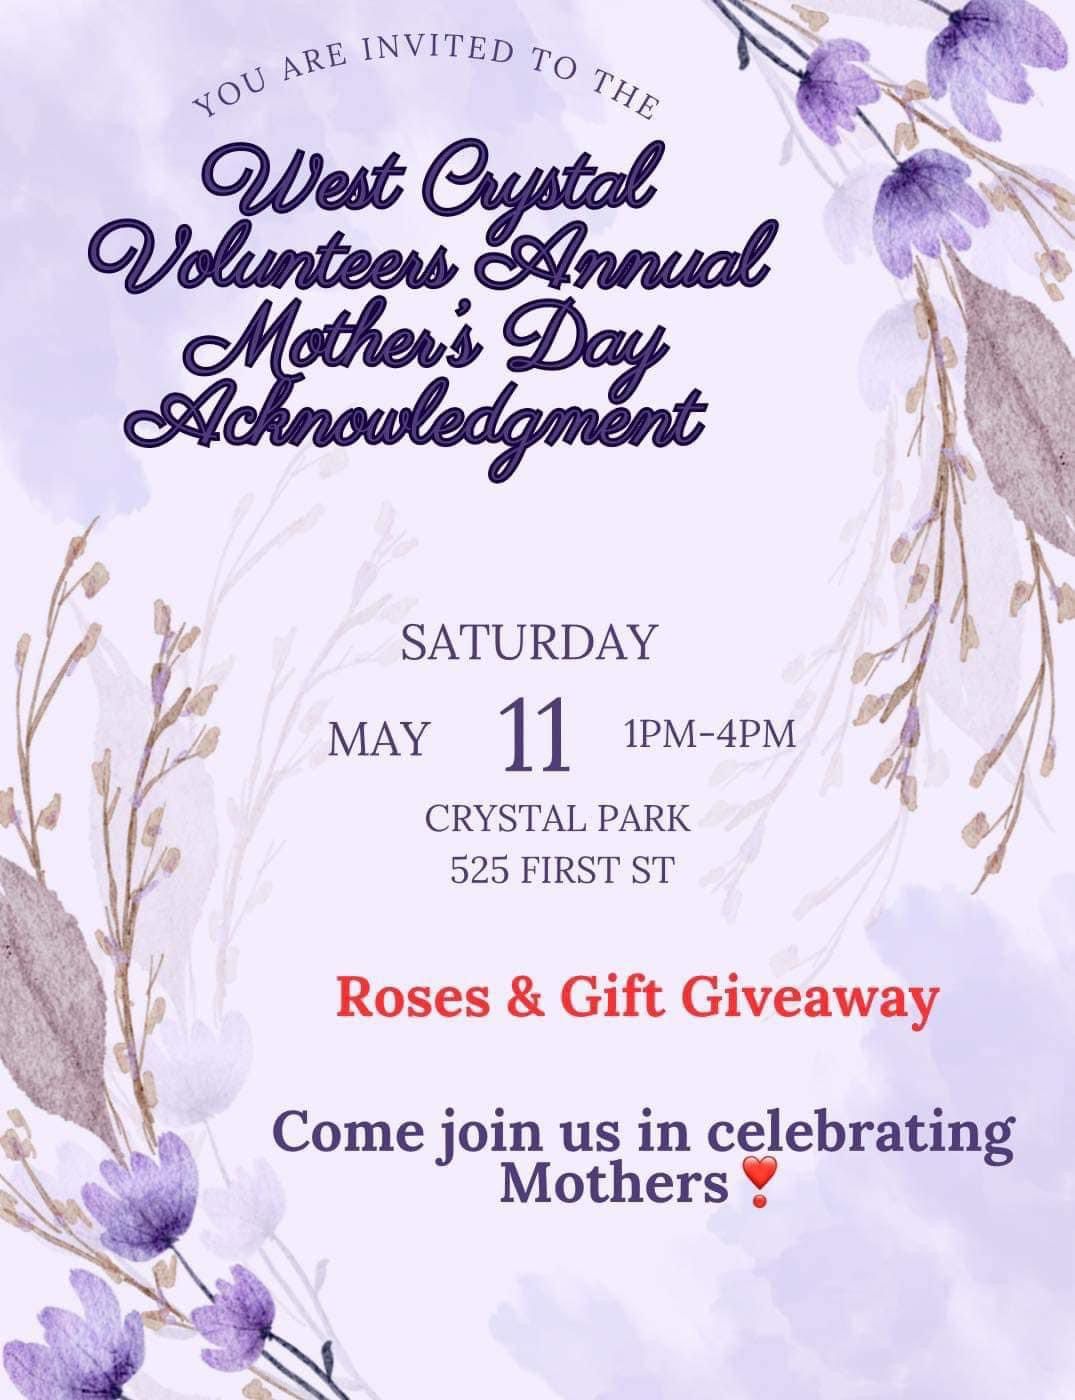 West Crystal Volunteers Presents: Annual MOTHER\u2019S DAY Acknowledgement 